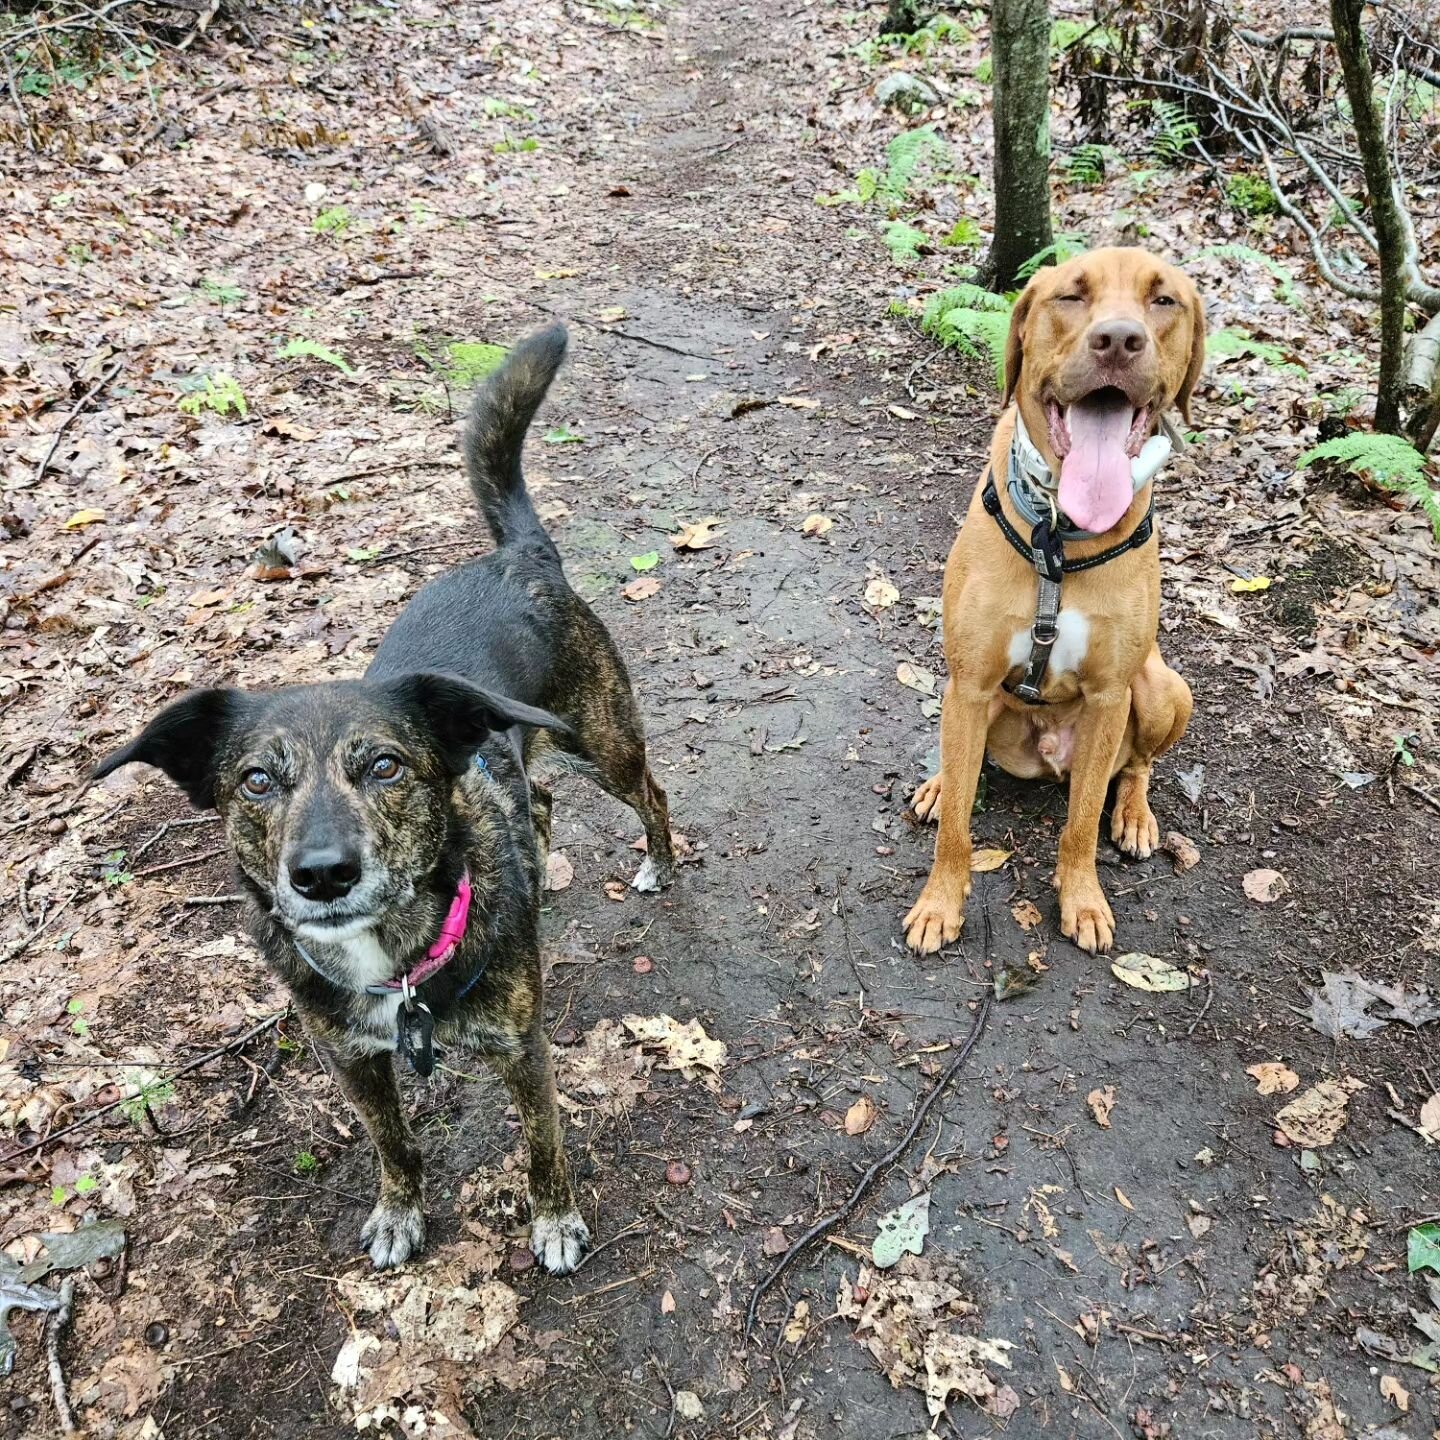 When you get to hike with your little(big) bro🐶🥰🐶
Paisley &amp; her brother Rusty happily exploring the trails together yesterday.